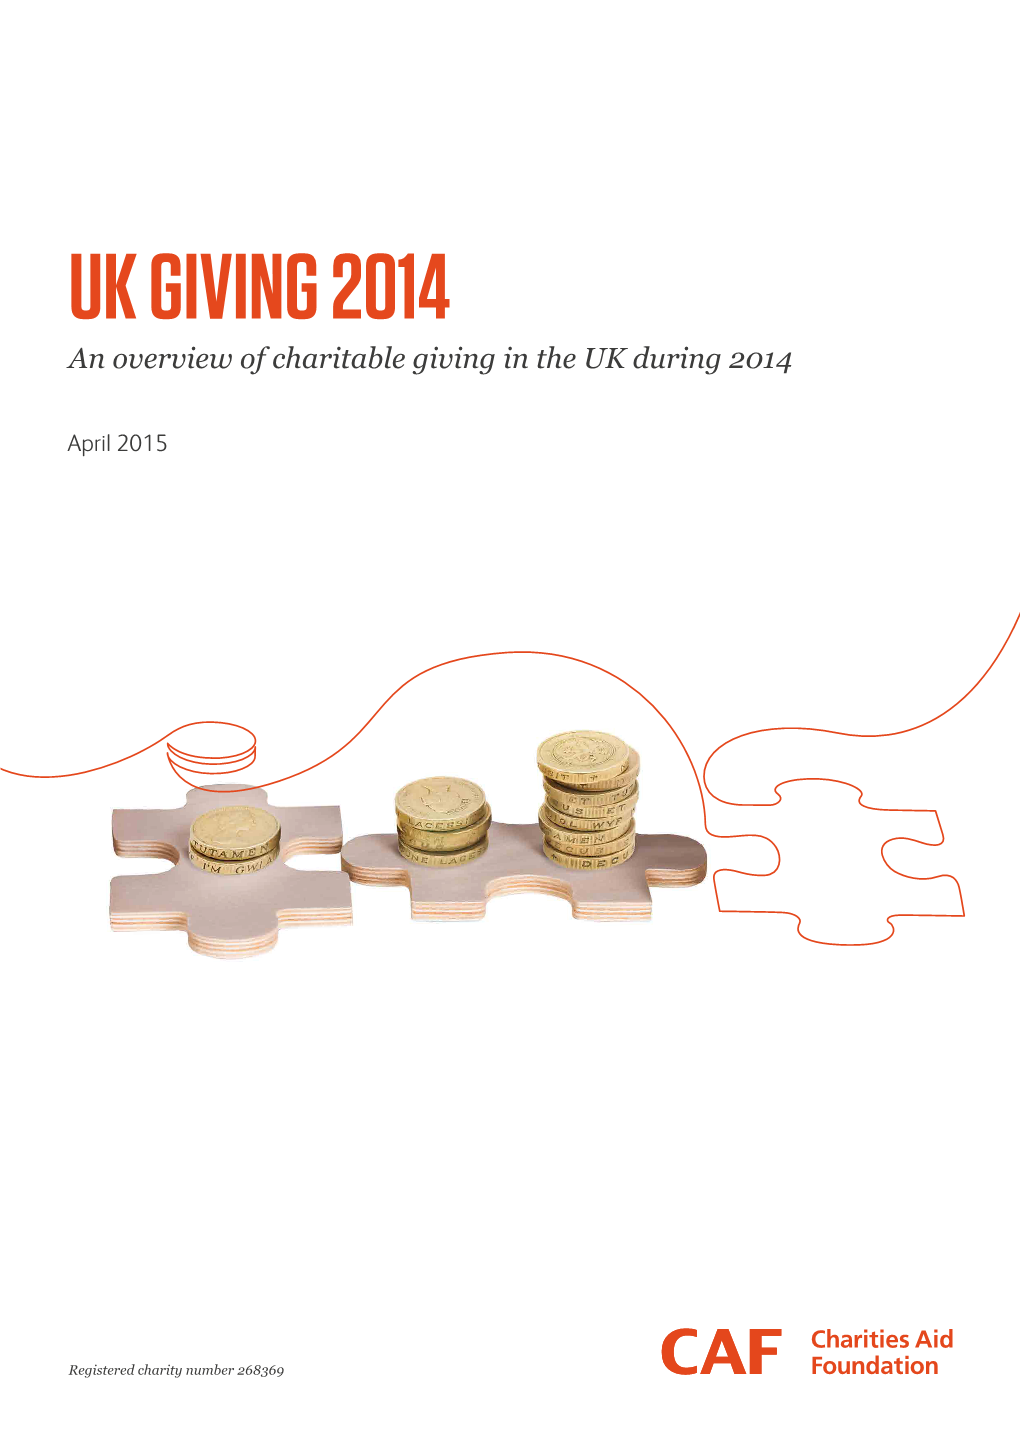 UK GIVING 2014 an Overview of Charitable Giving in the UK During 2014